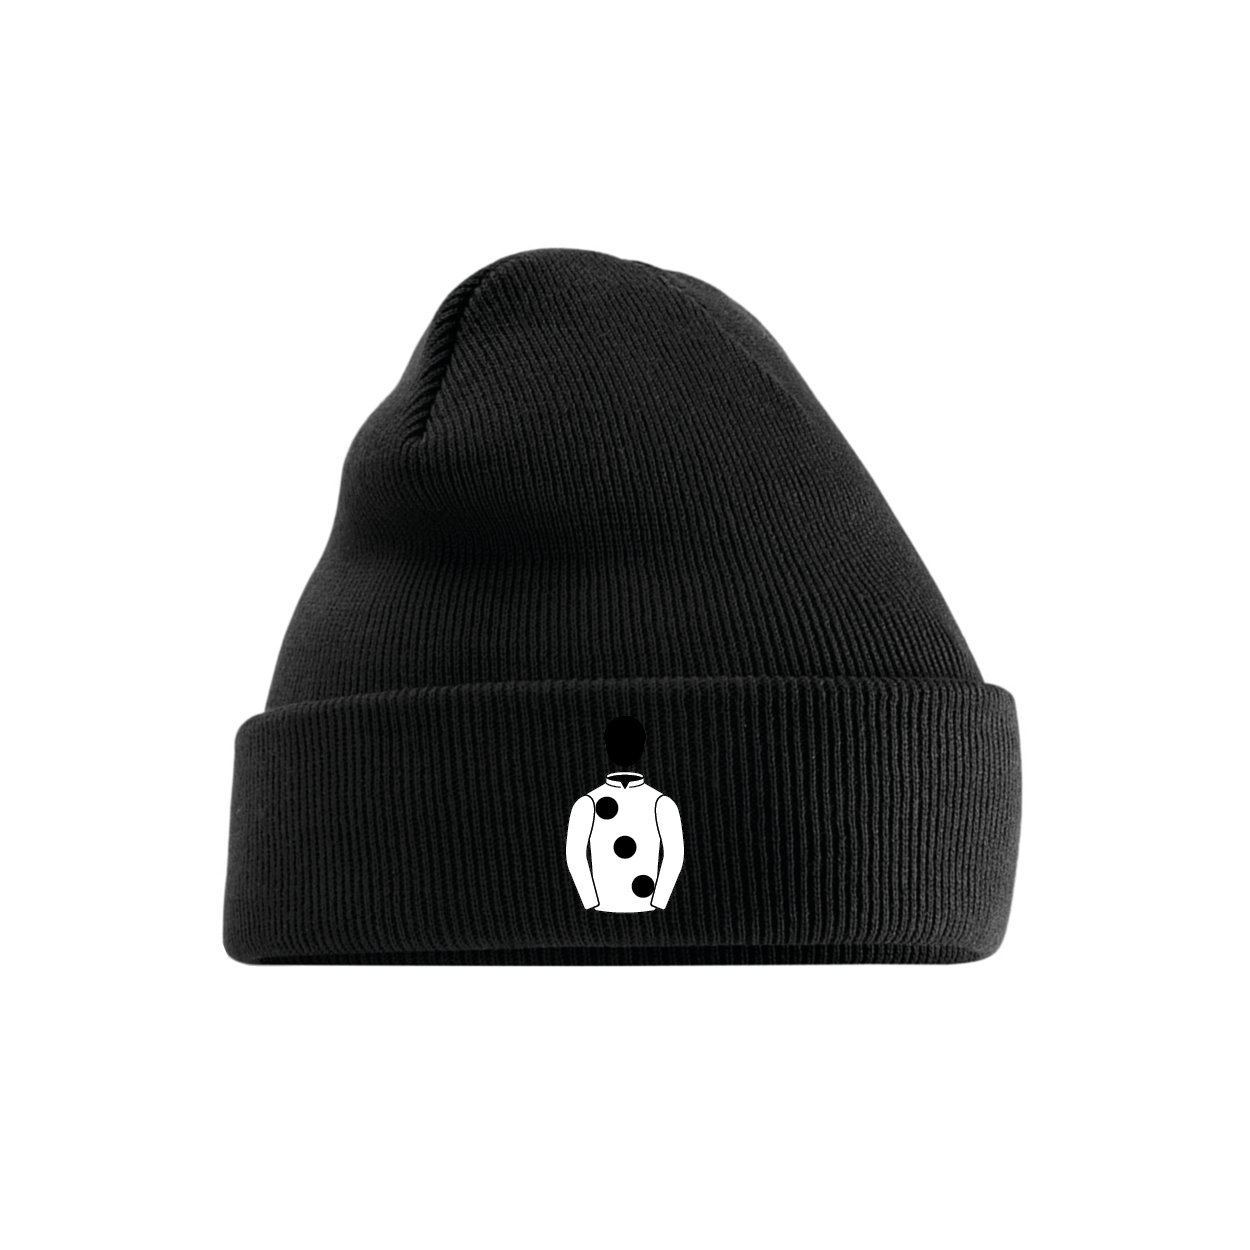 Elite Racing Club Embroidered Cuffed Beanie - Hacked Up